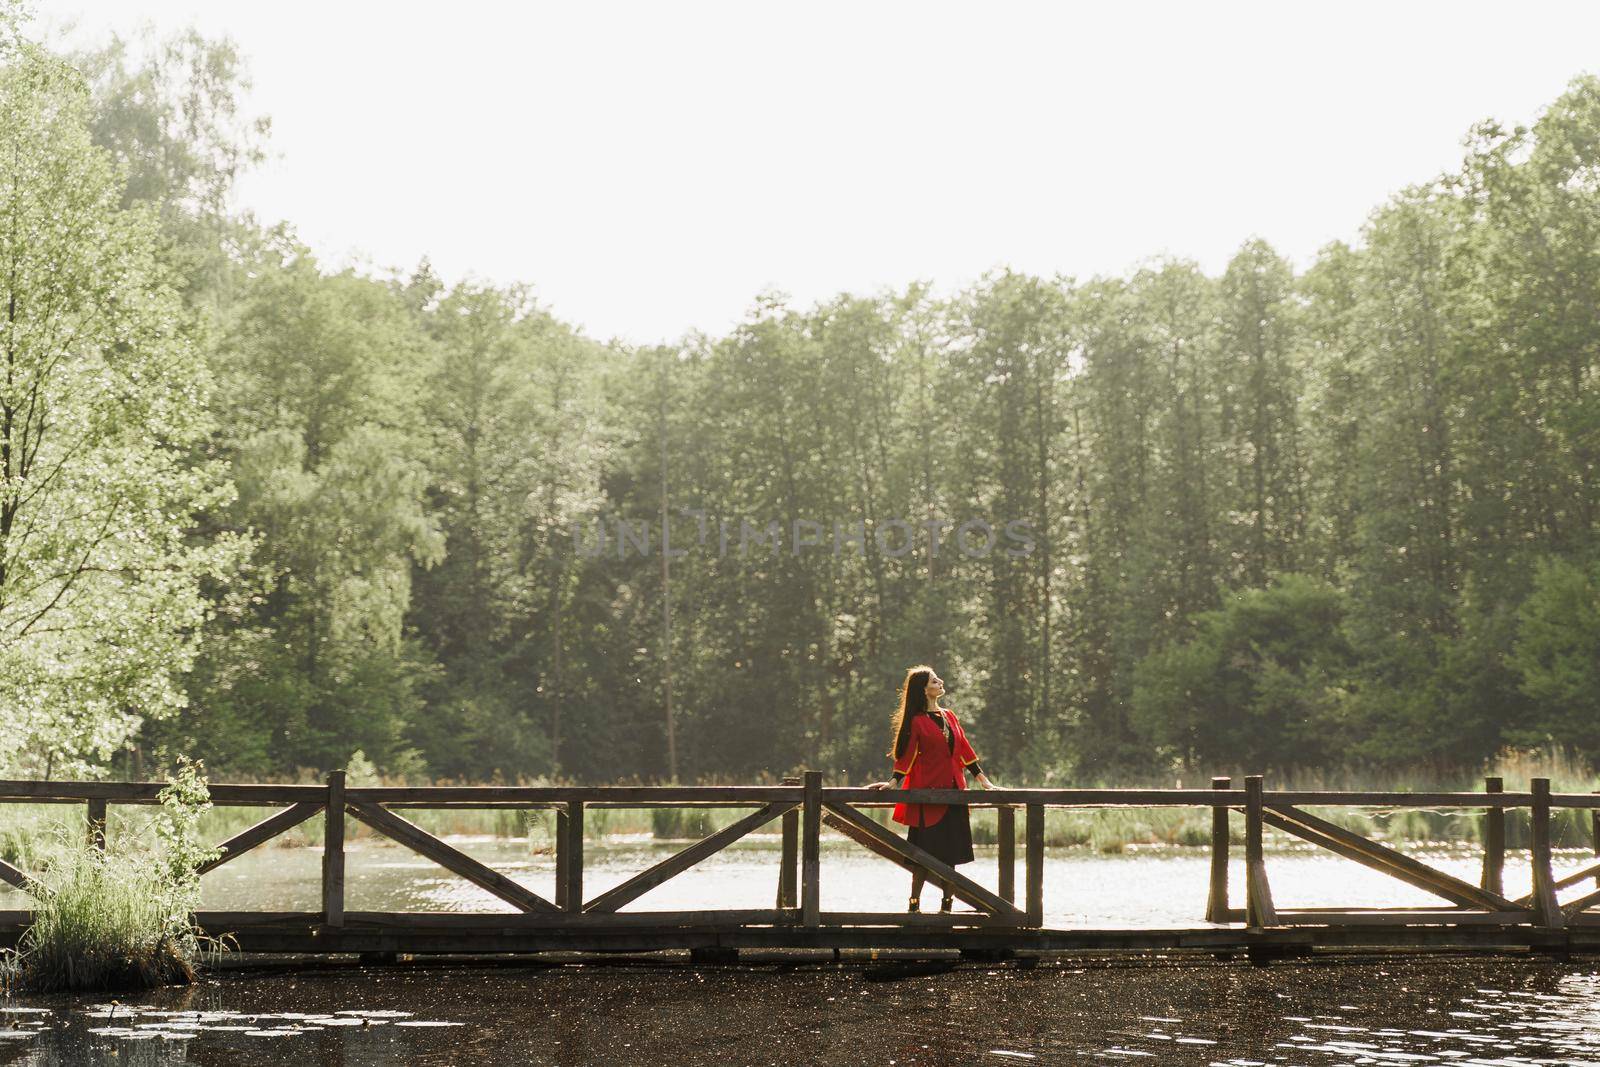 Georgian woman in red national dress with cross symbols. Attractive woman on the lake with forest background. Georgian culture lifestyle